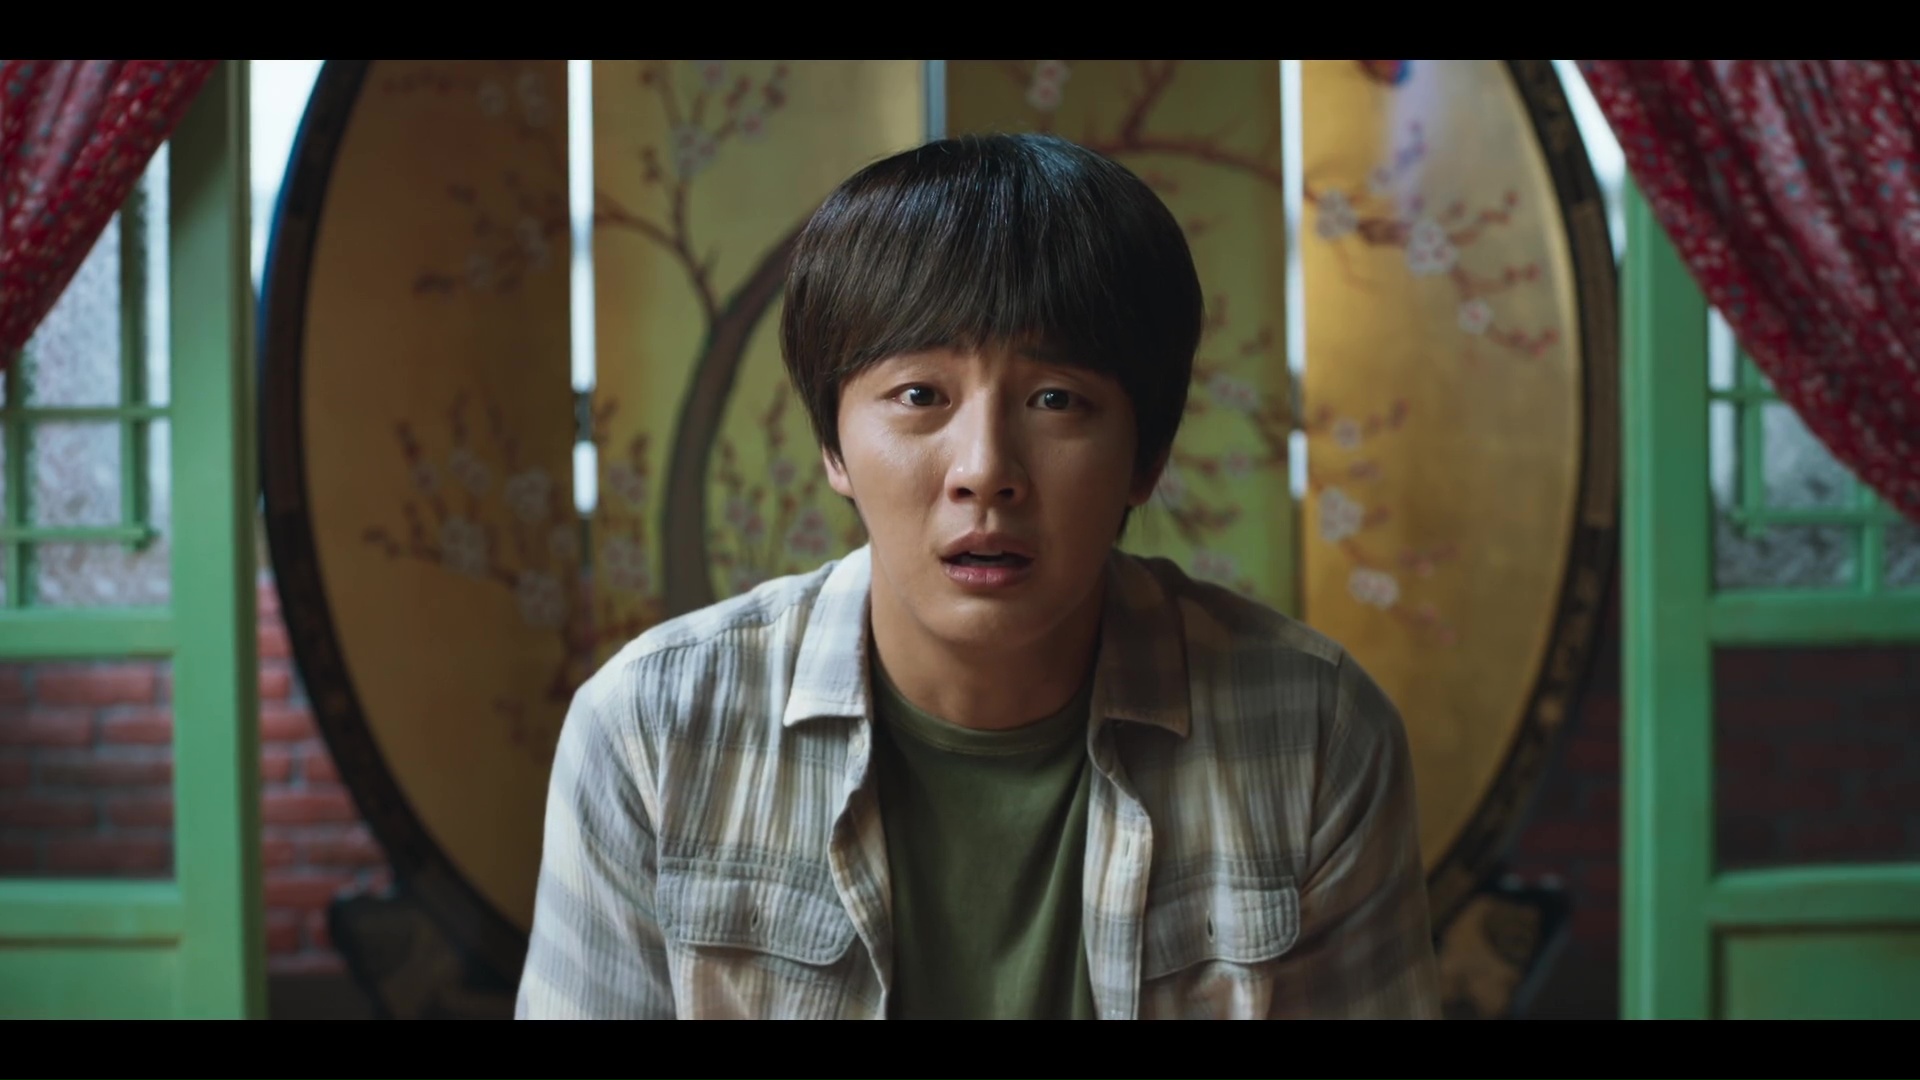 Good Ol’ Review: Yoon Shi Yoon Does What He Does Best in Surprisingly Meaningful “You Raise Me Up”